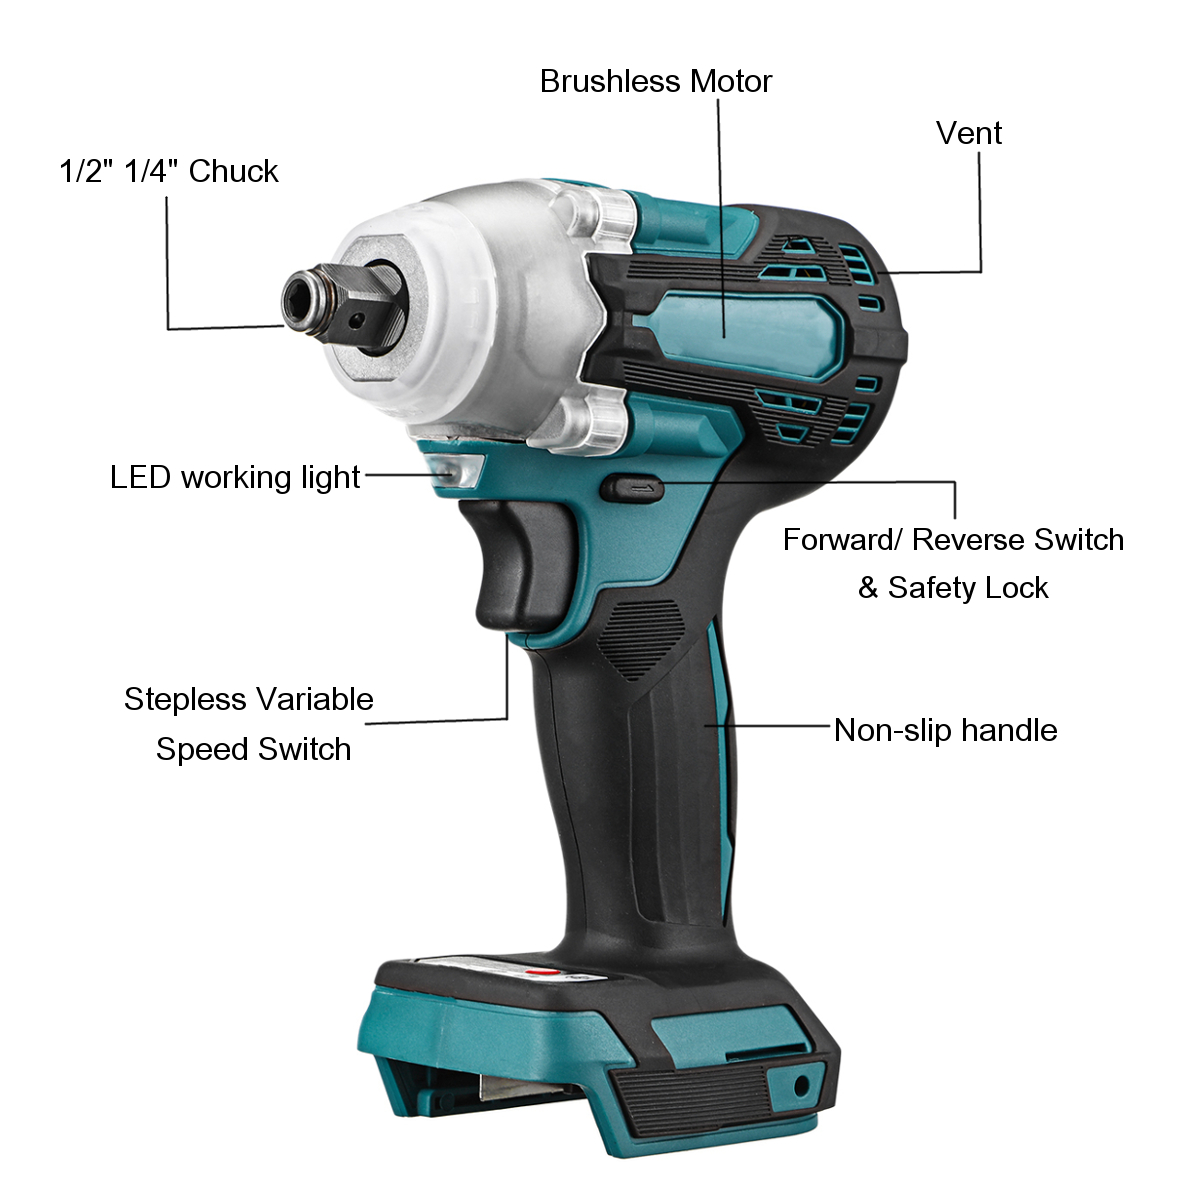 DTW300-2-in1-18V-800Nm-Li-Ion-Brushless-Cordless-12quot-Electric-Wrench-14quotScrewdriver-Drill-Repl-1854869-15